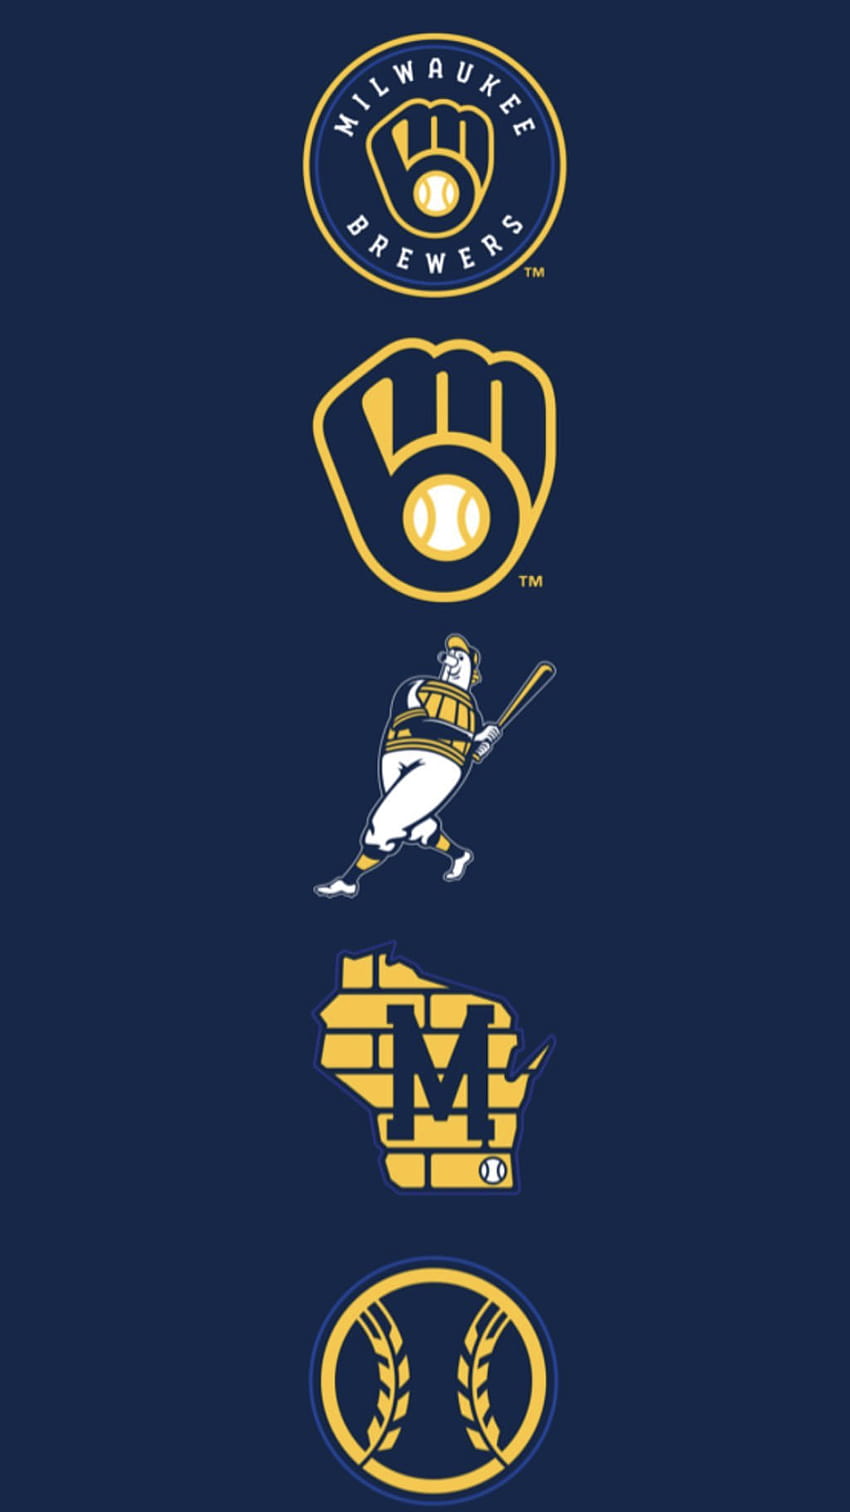 Bringing back the greatest logo in baseball history for 2020! in 2020, retro brewers logo HD phone wallpaper